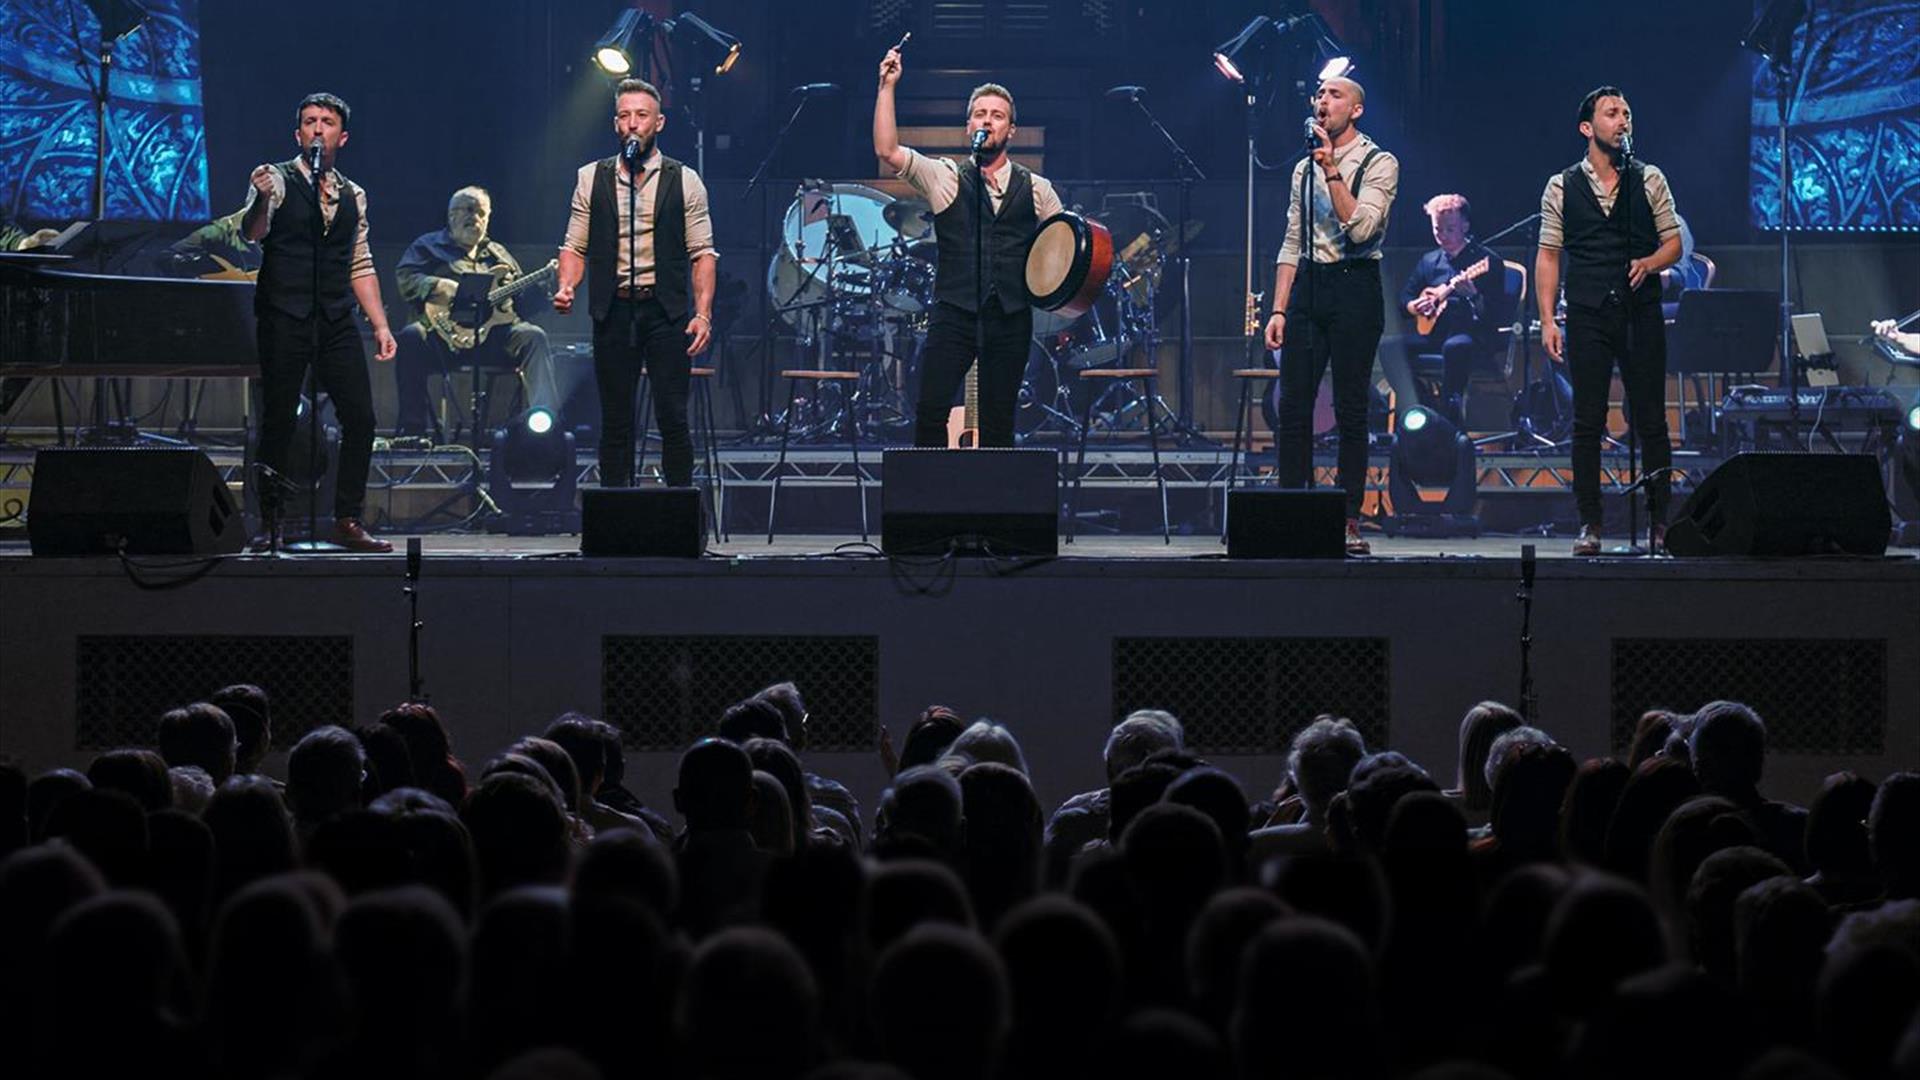 Image is of the members of the Shamrock Tenors on stage